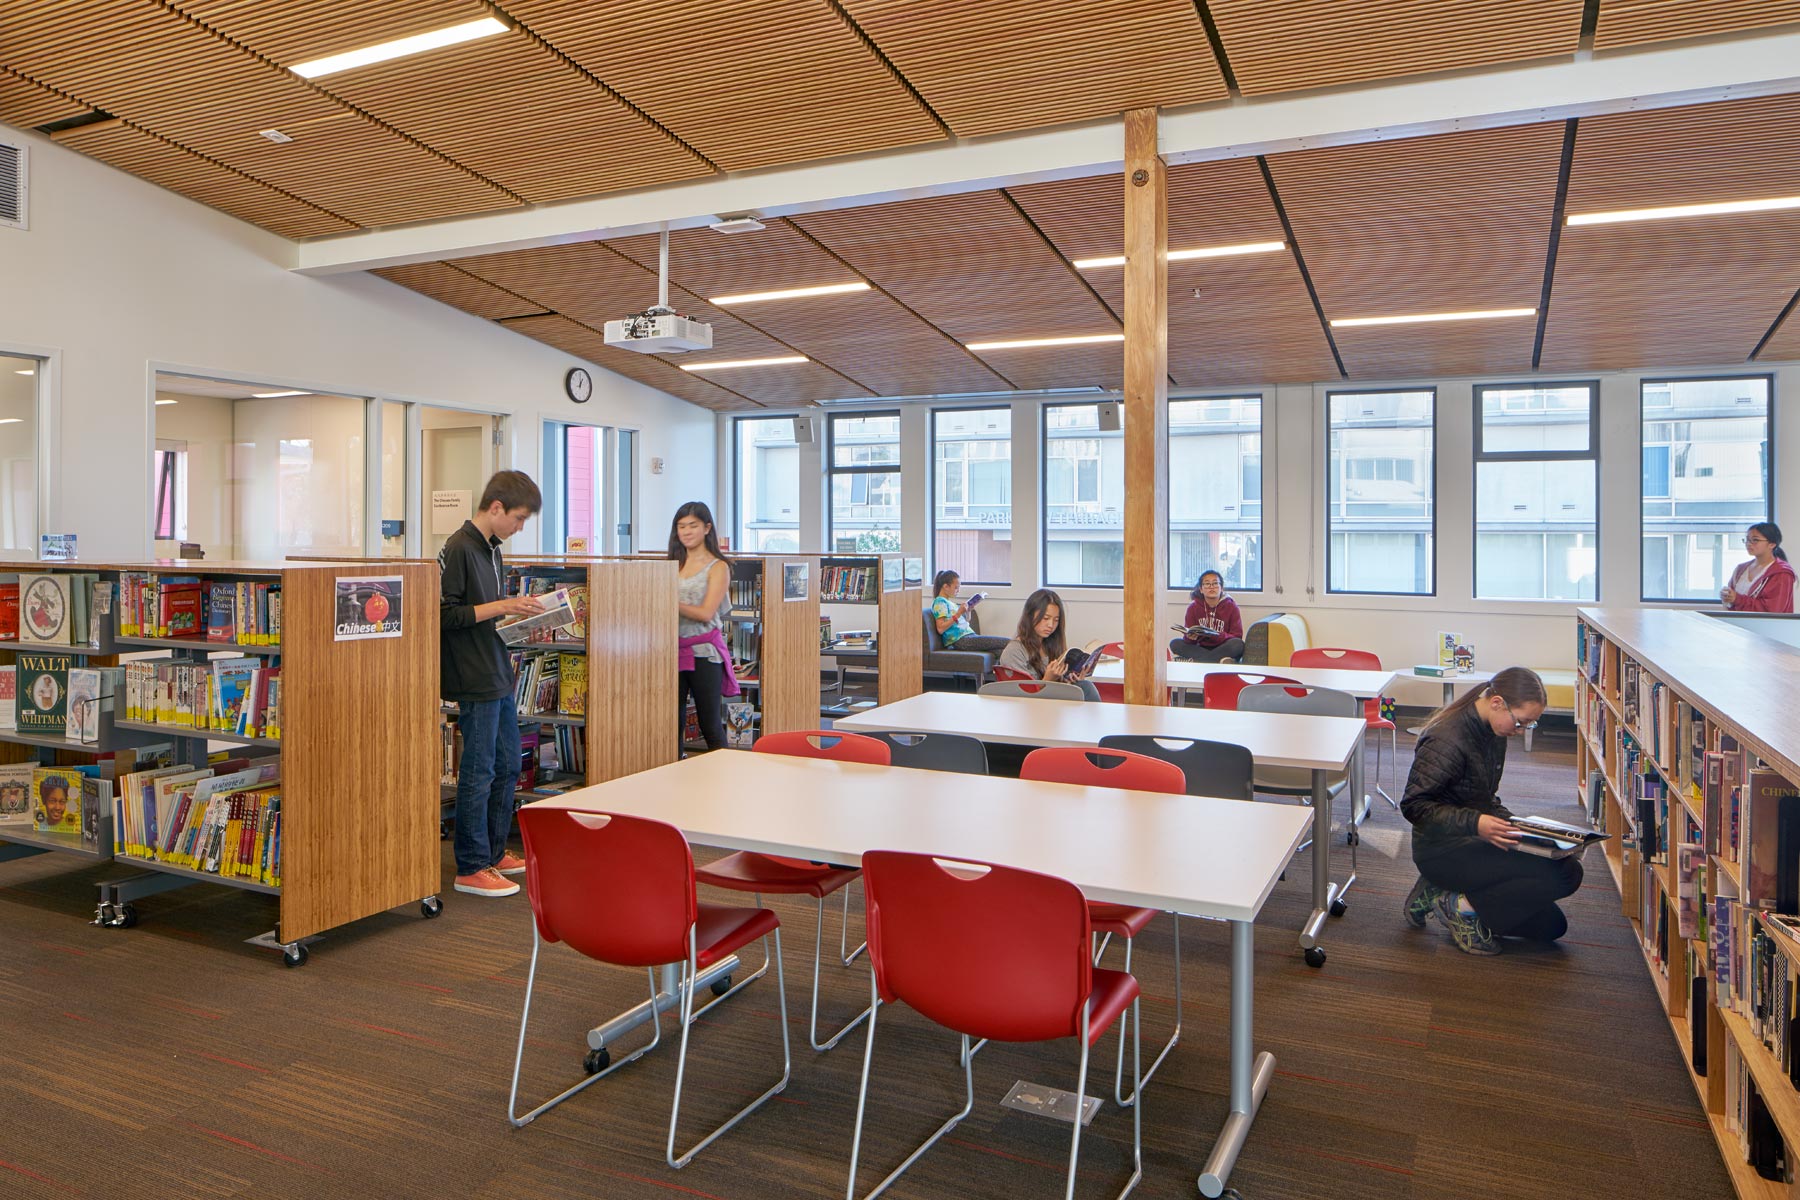 The Chinese American International School is a dual Chinese-English dual language immersion school in San Francisco; the new middle school campus is an adaptive reuse of two abandoned buildings into a dynamic and collaborative new educational environment.